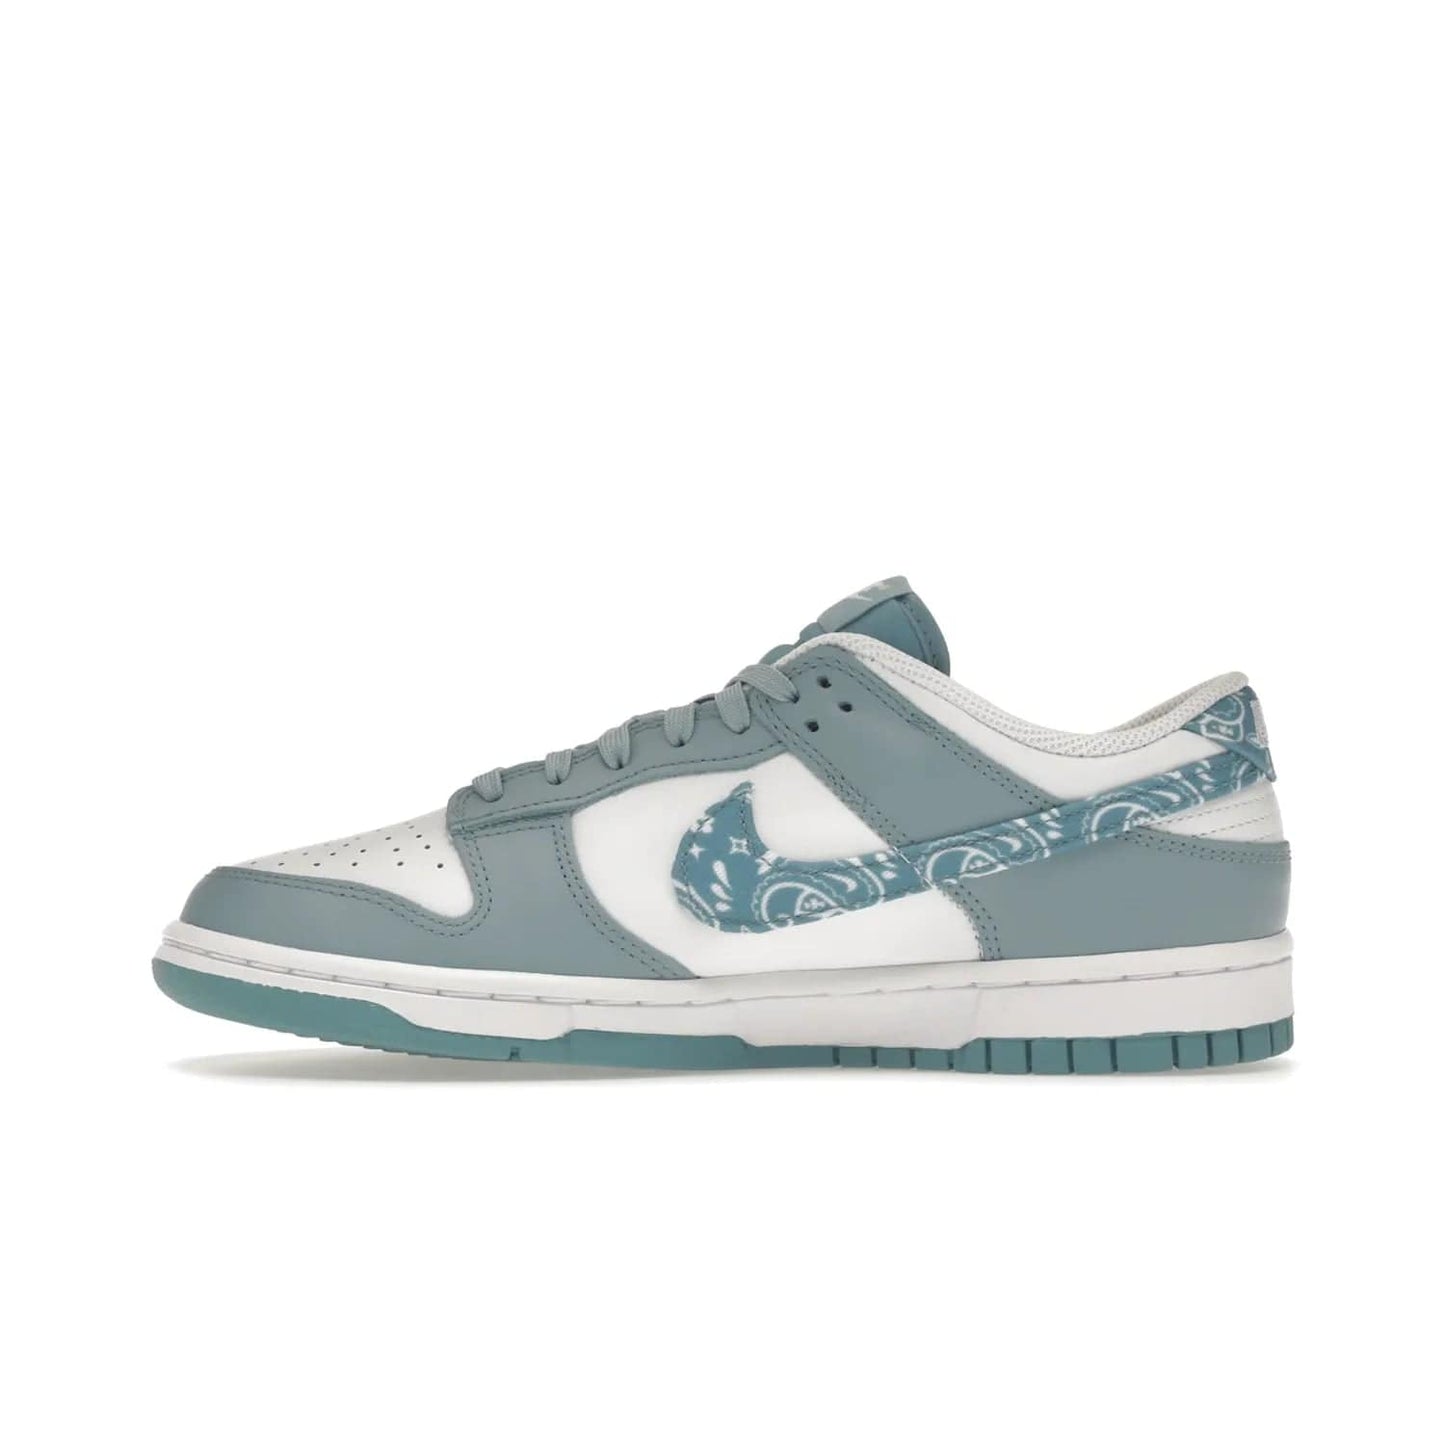 Nike Dunk Low Essential Paisley Pack Worn Blue (Women's) - Image 19 - Only at www.BallersClubKickz.com - Get the Nike Dunk Low Essential Paisley Pack Worn Blue (Women's) for style and comfort. White leather construction, light blue leather overlays, canvas Swooshes and matching heel tabs offer a rich blue hue. Finished by a white and light blue sole, this classic Nike Dunk is the perfect addition to any wardrobe. Released in March 2022.